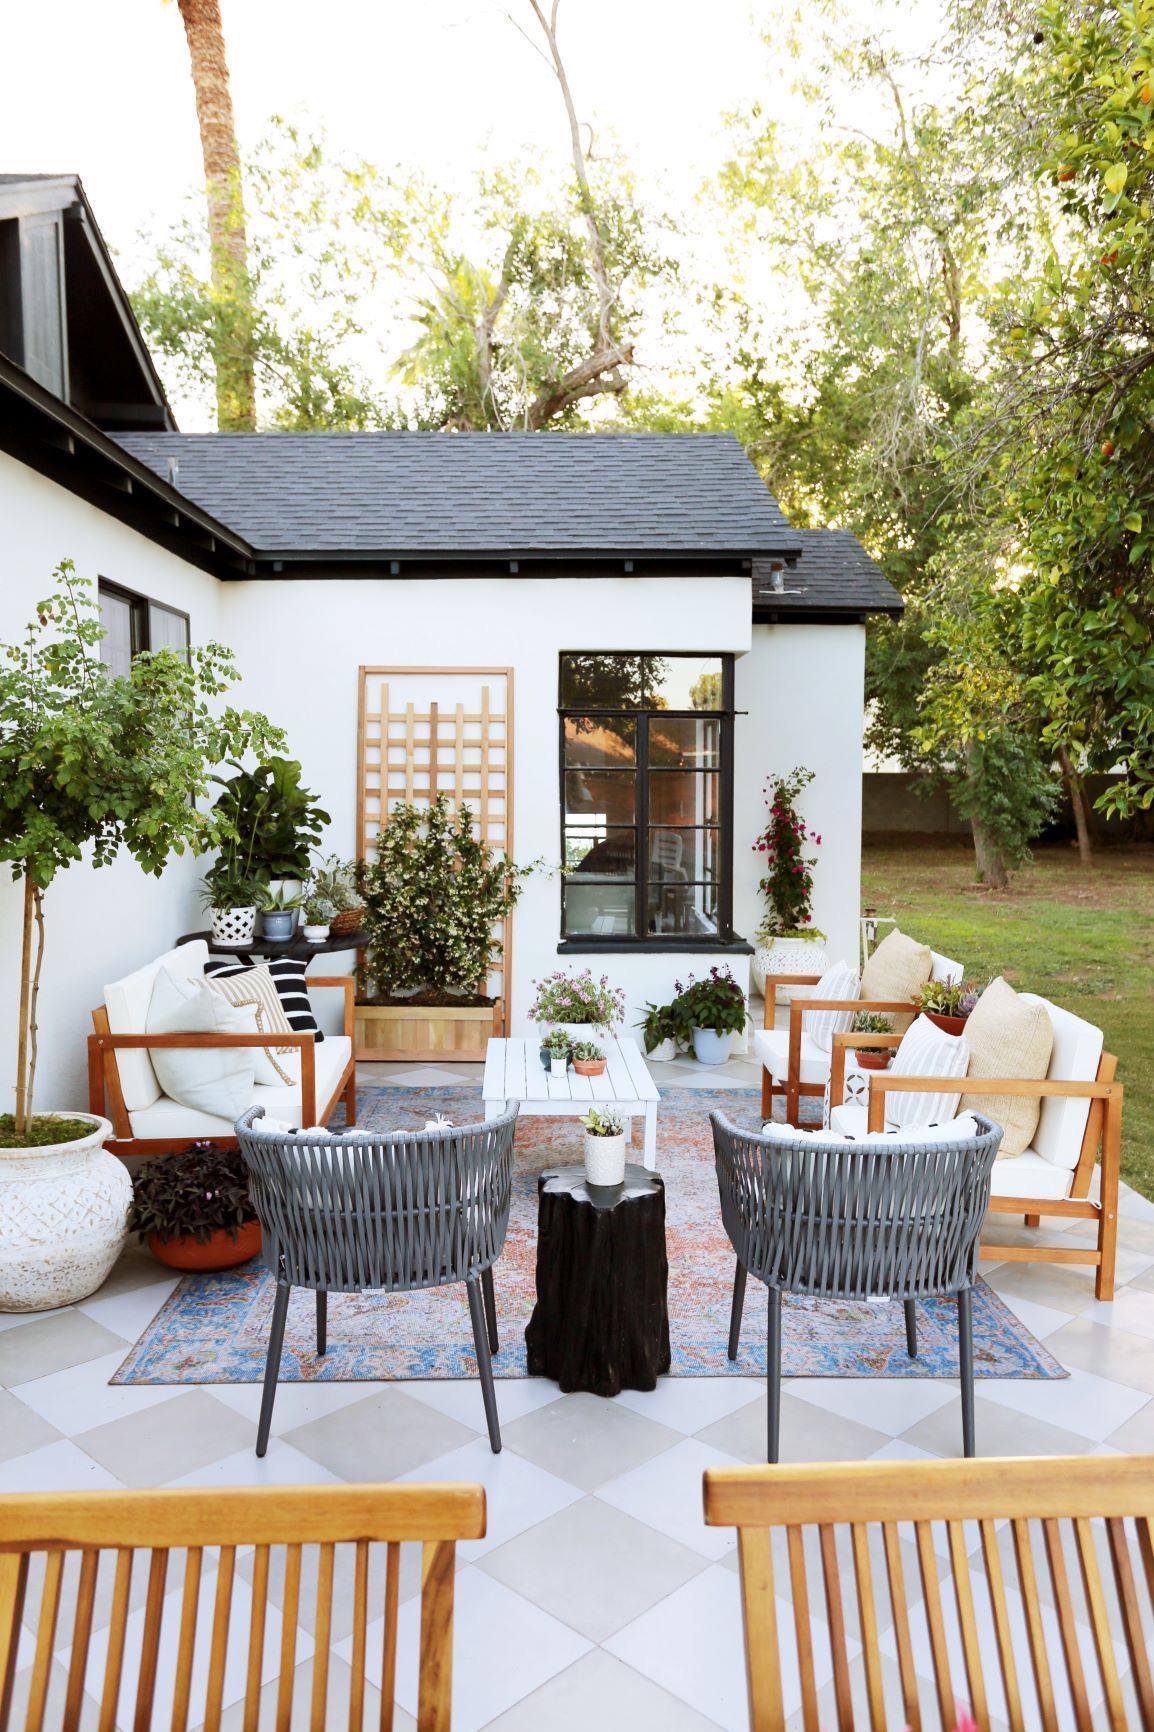 Revamp Your Outdoor Space: Inspiring Porch Ideas for a Stylish Home